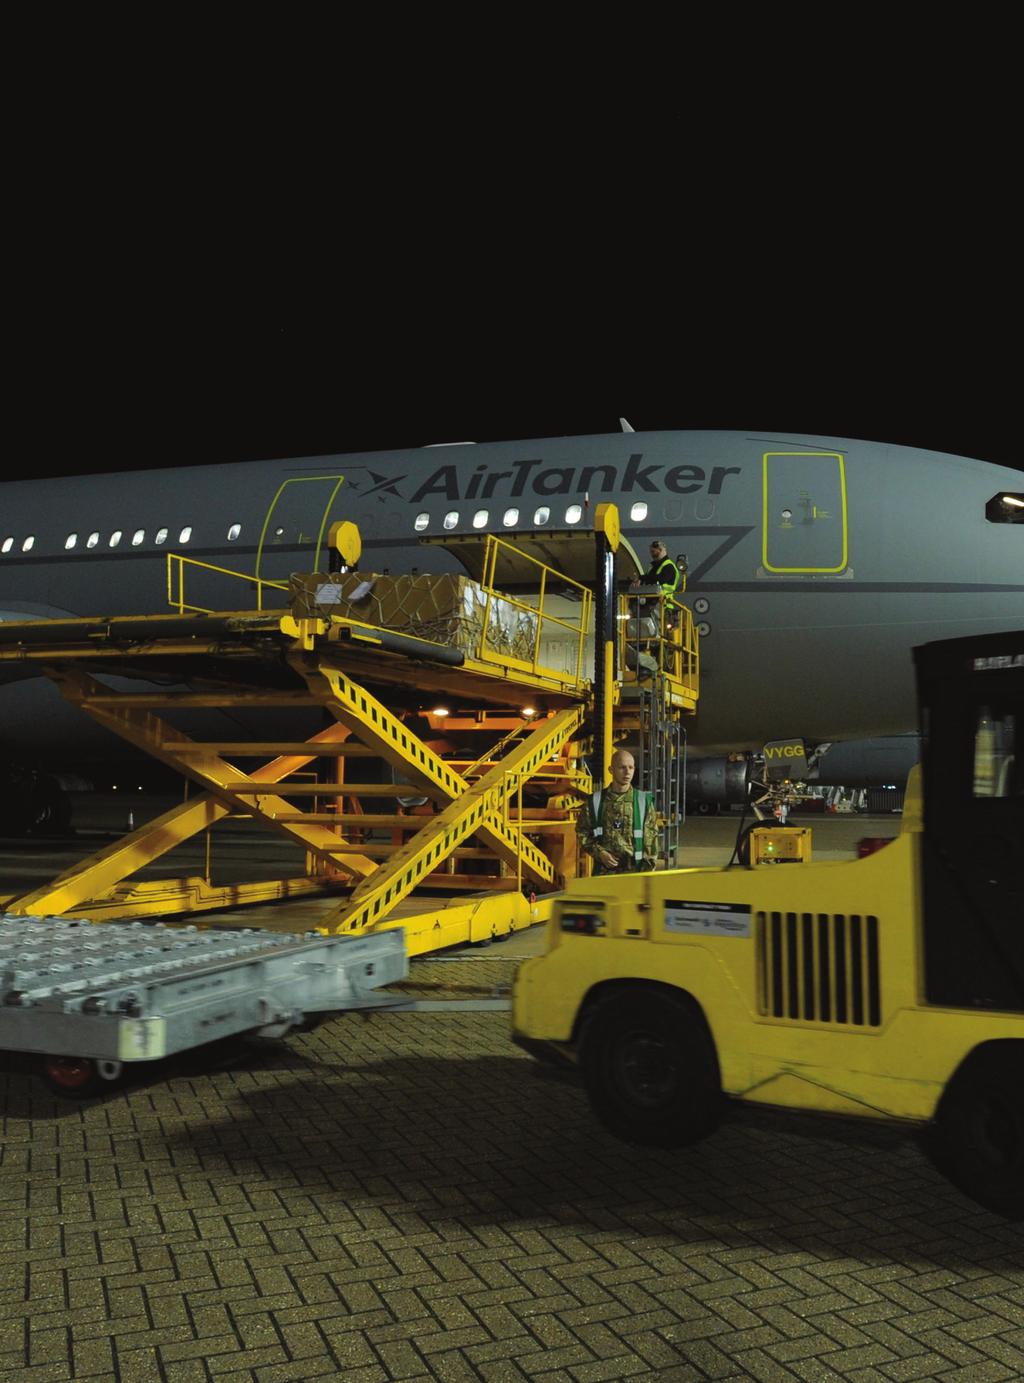 ENHANCING DAILY FLIGHT OPERATIONS Delivering the right